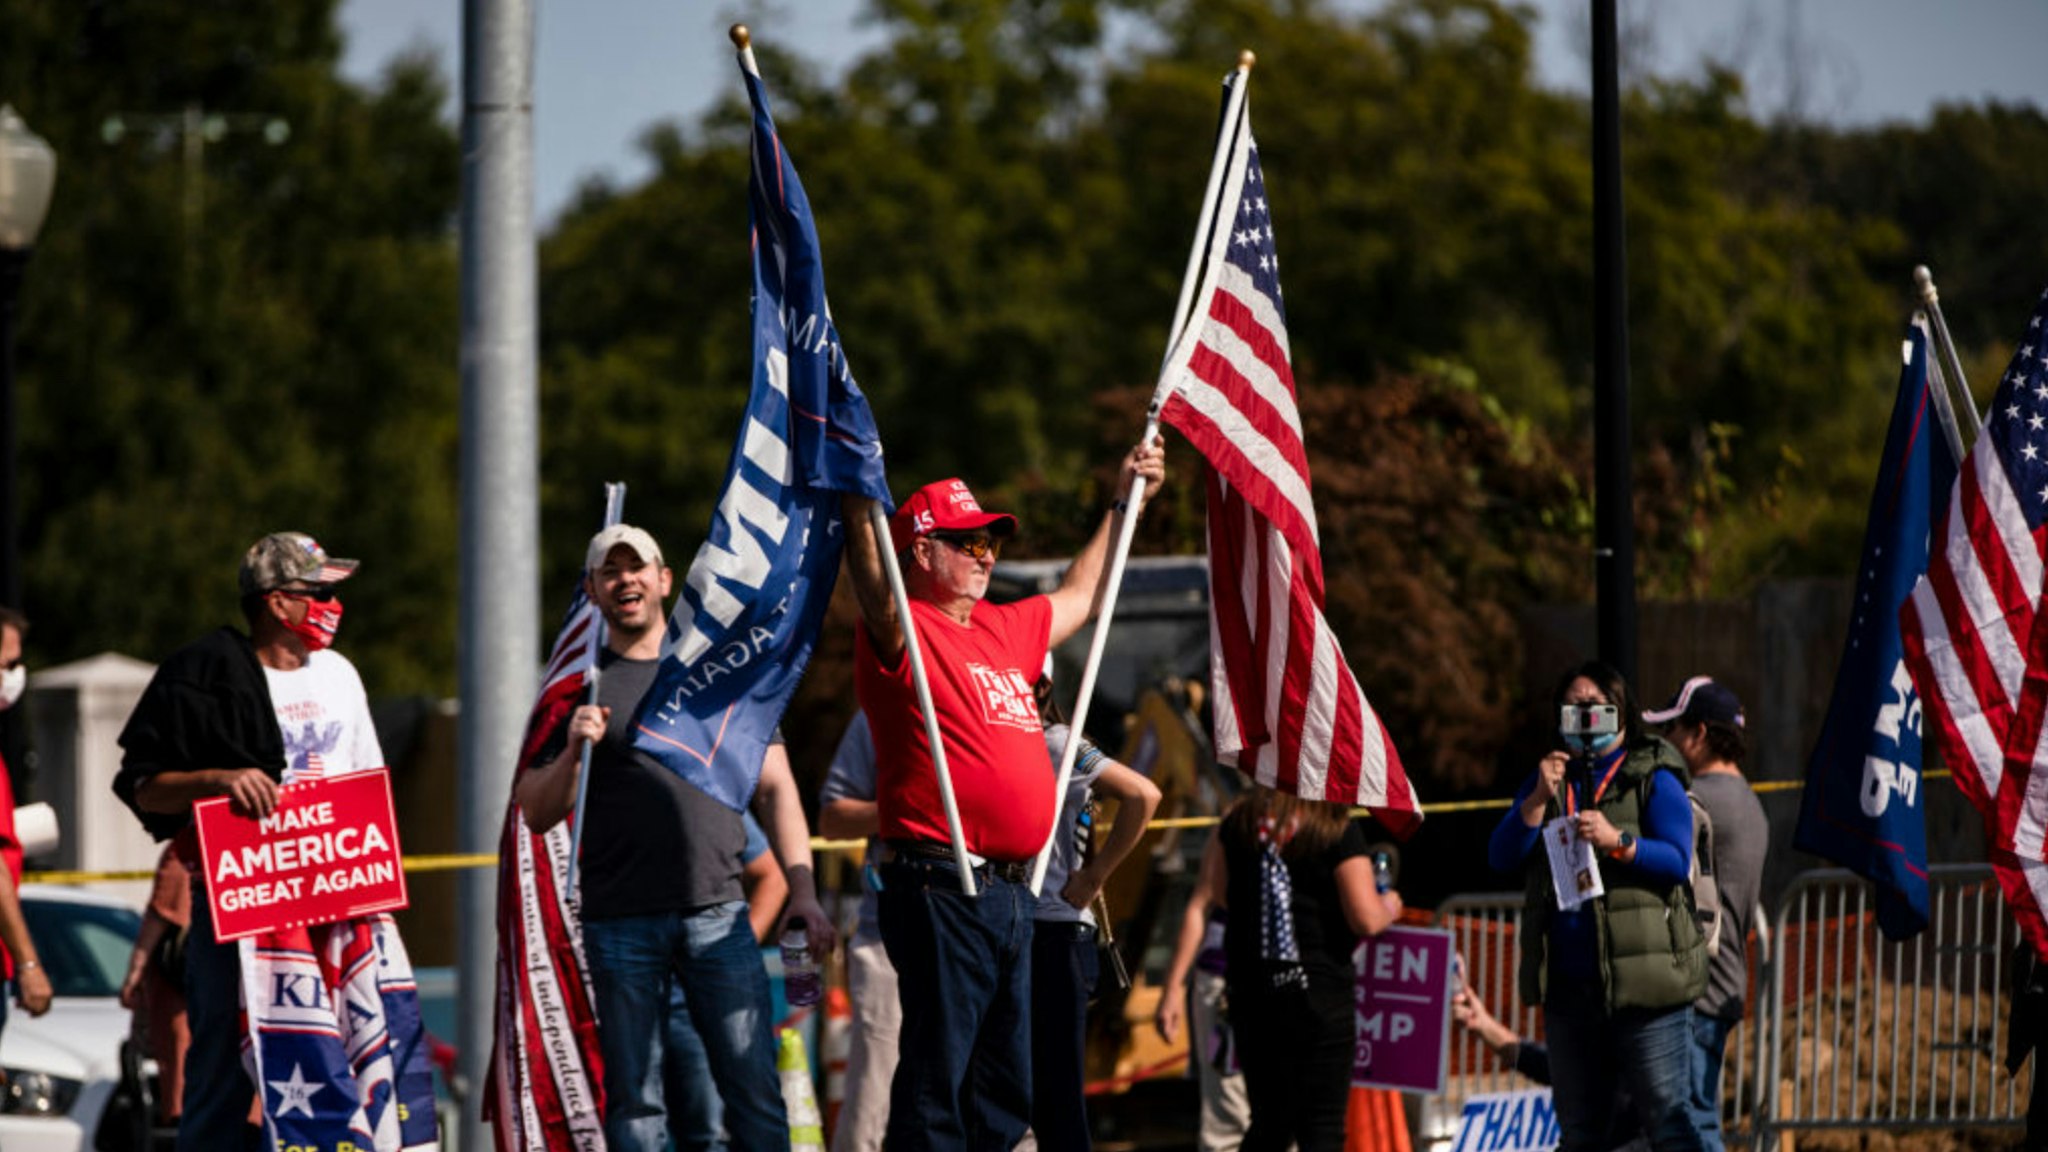 Supporters of President Donald Trump gather outside of Walter Reed National Military Medical Center after the President was admitted for treatment of COVID-19 on October 4, 2020 in Bethesda, Maryland.